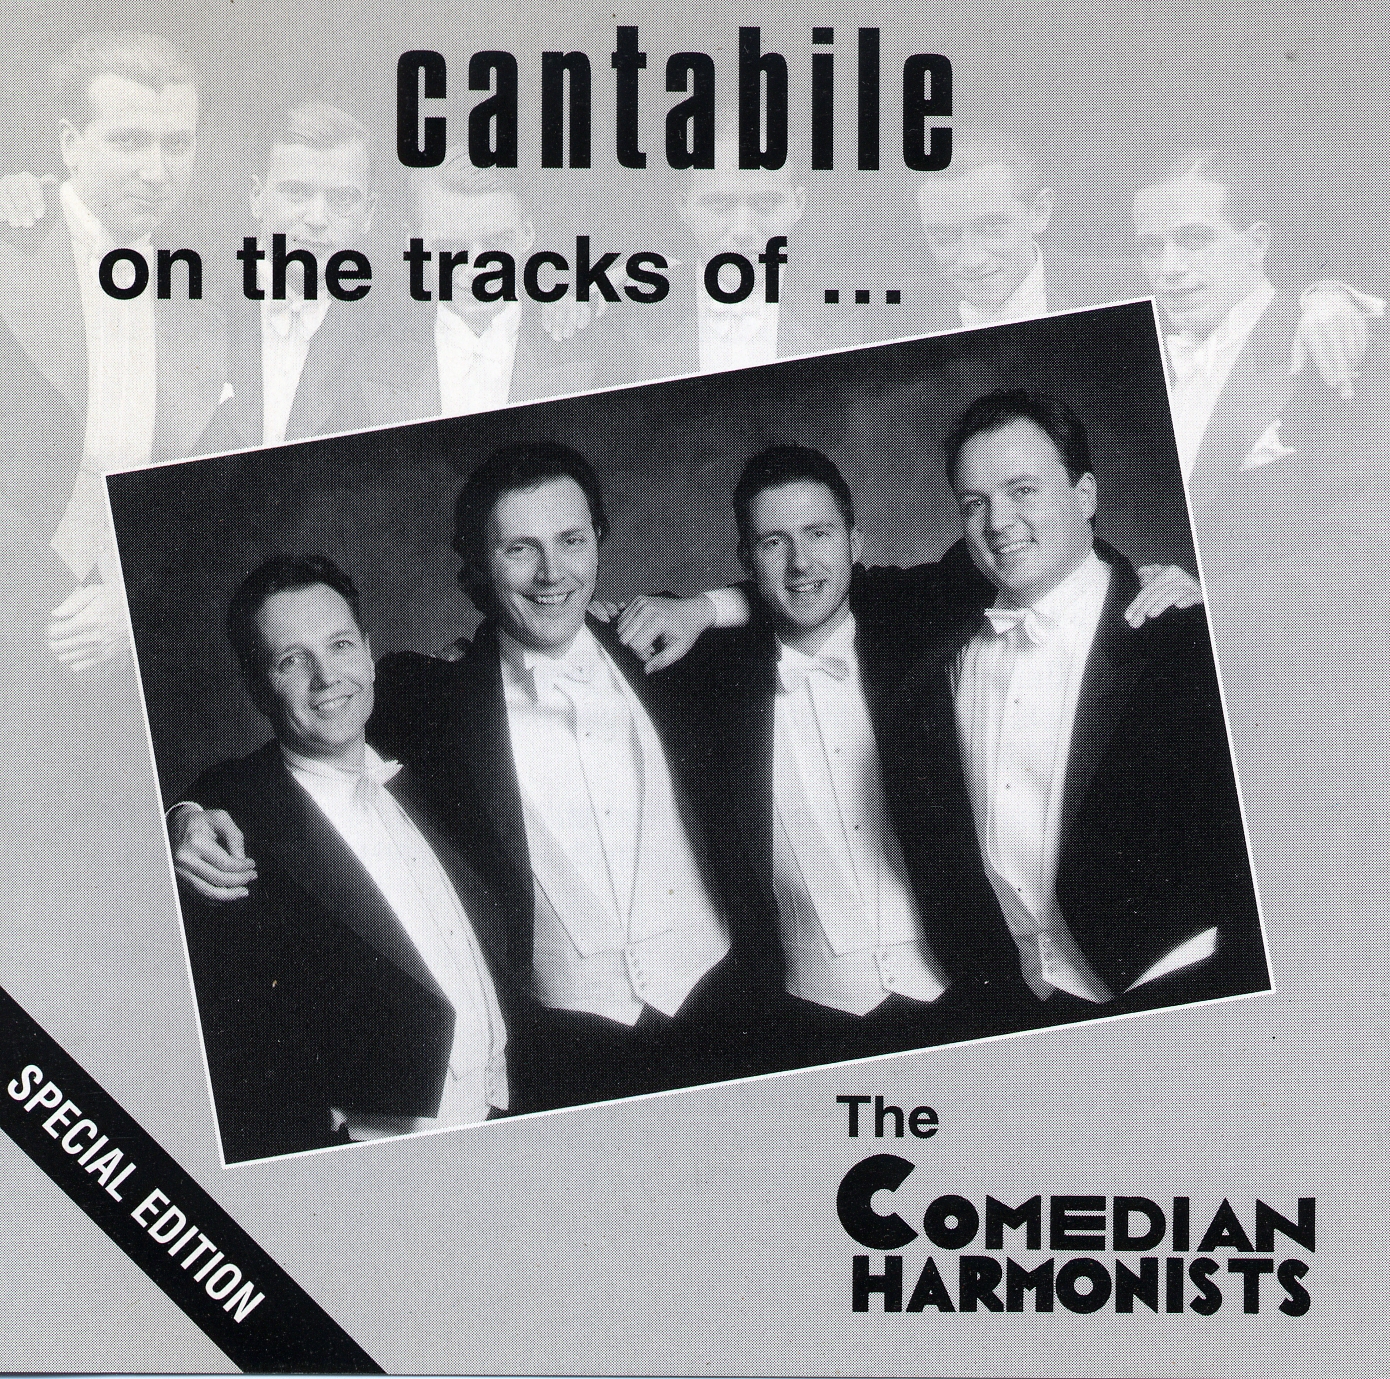 Cantabile - on the tracks of The Comedian Harmonists